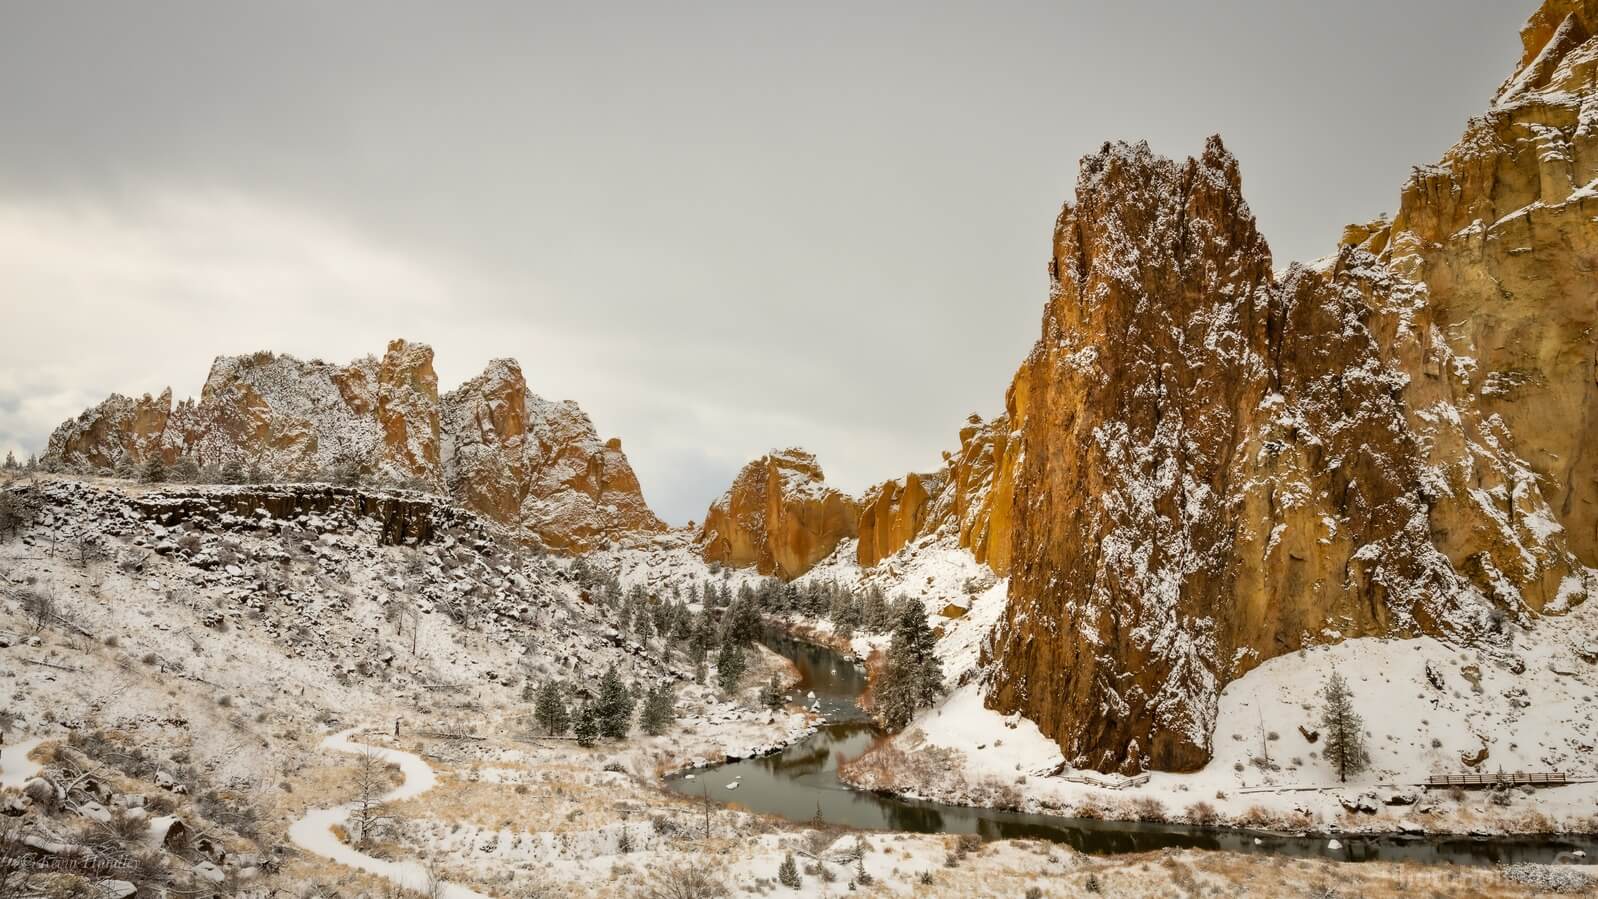 Image of Smith Rock State Park - Main Viewpoint by Kevin Handley